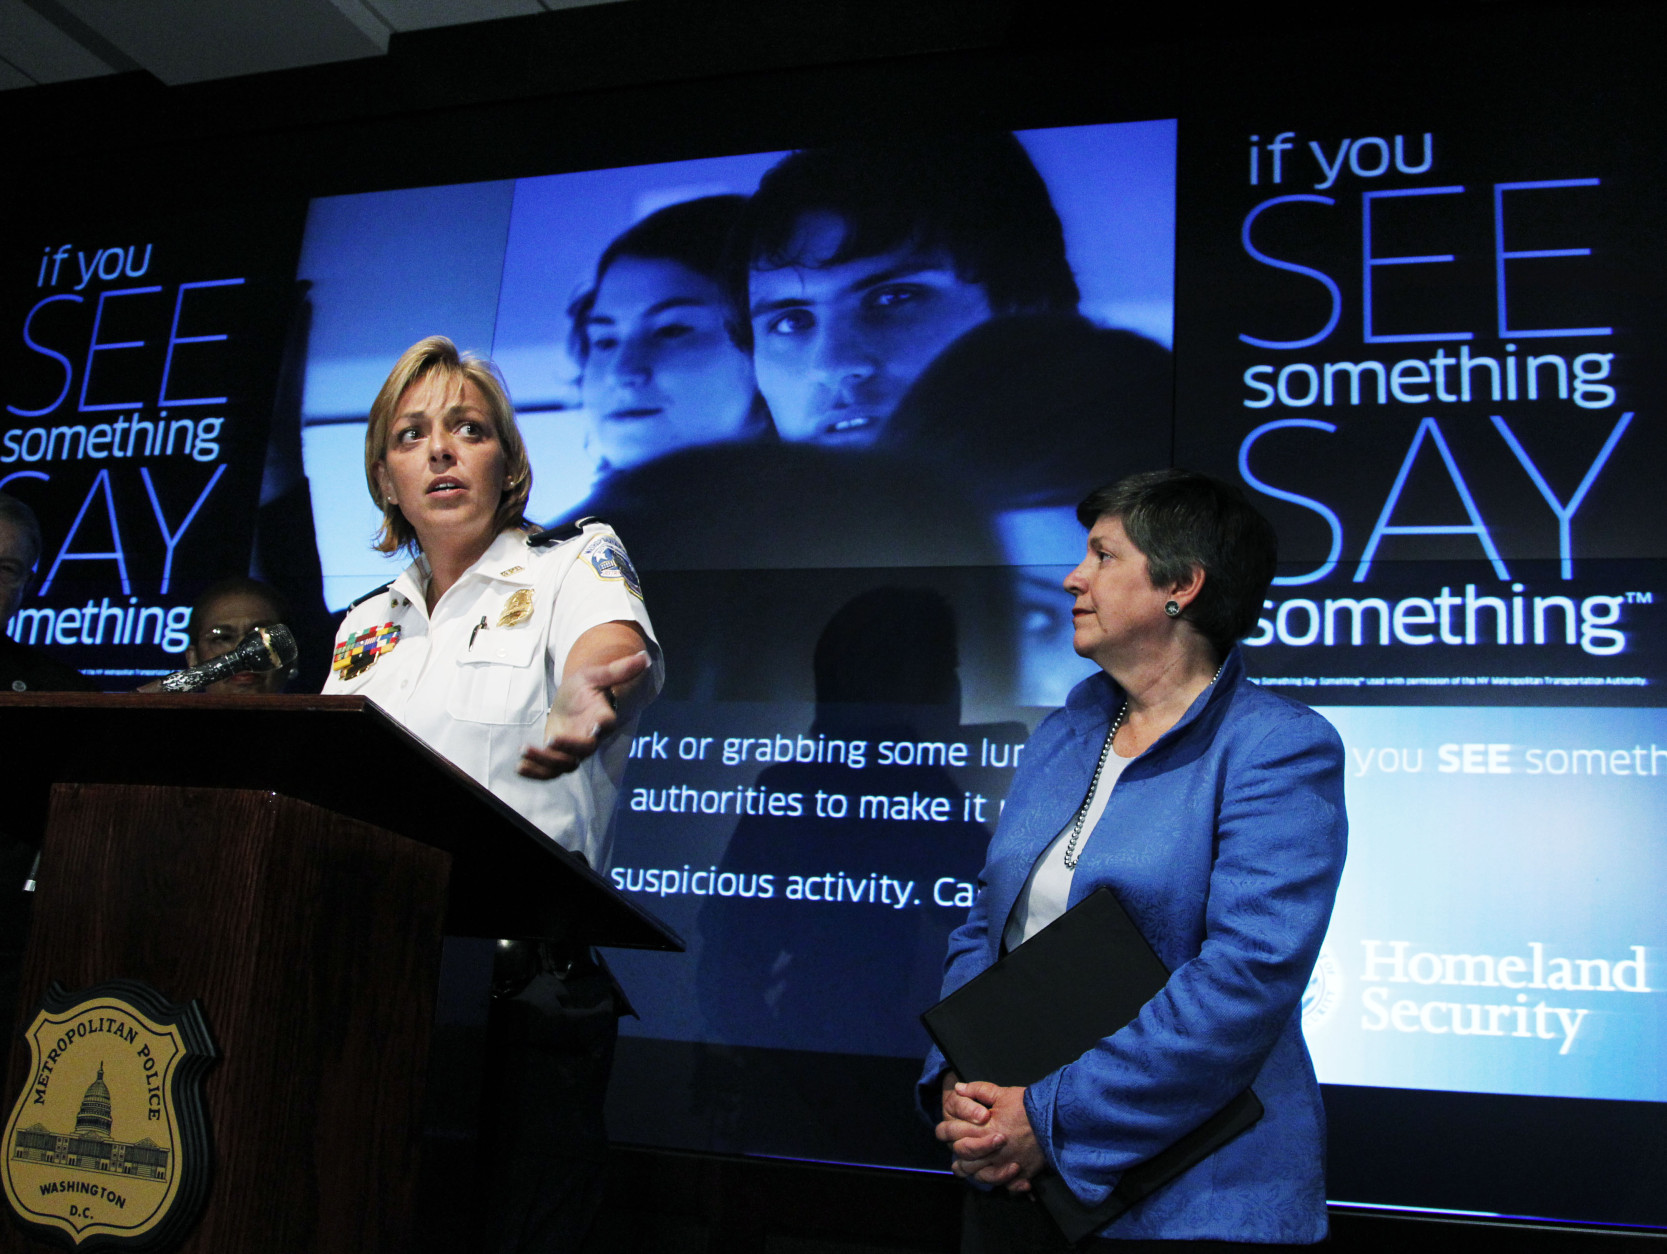 Washington Police Chief Cathy Lanier, left, accompanied by Homeland Security Secretary Janet Napolitano, speaks during a news conference on the launching of a series of community-based initiatives in conjunction with National Night Out, Tuesday, Aug. 3, 2010, in Washington.   (AP Photo/Manuel Balce Ceneta)